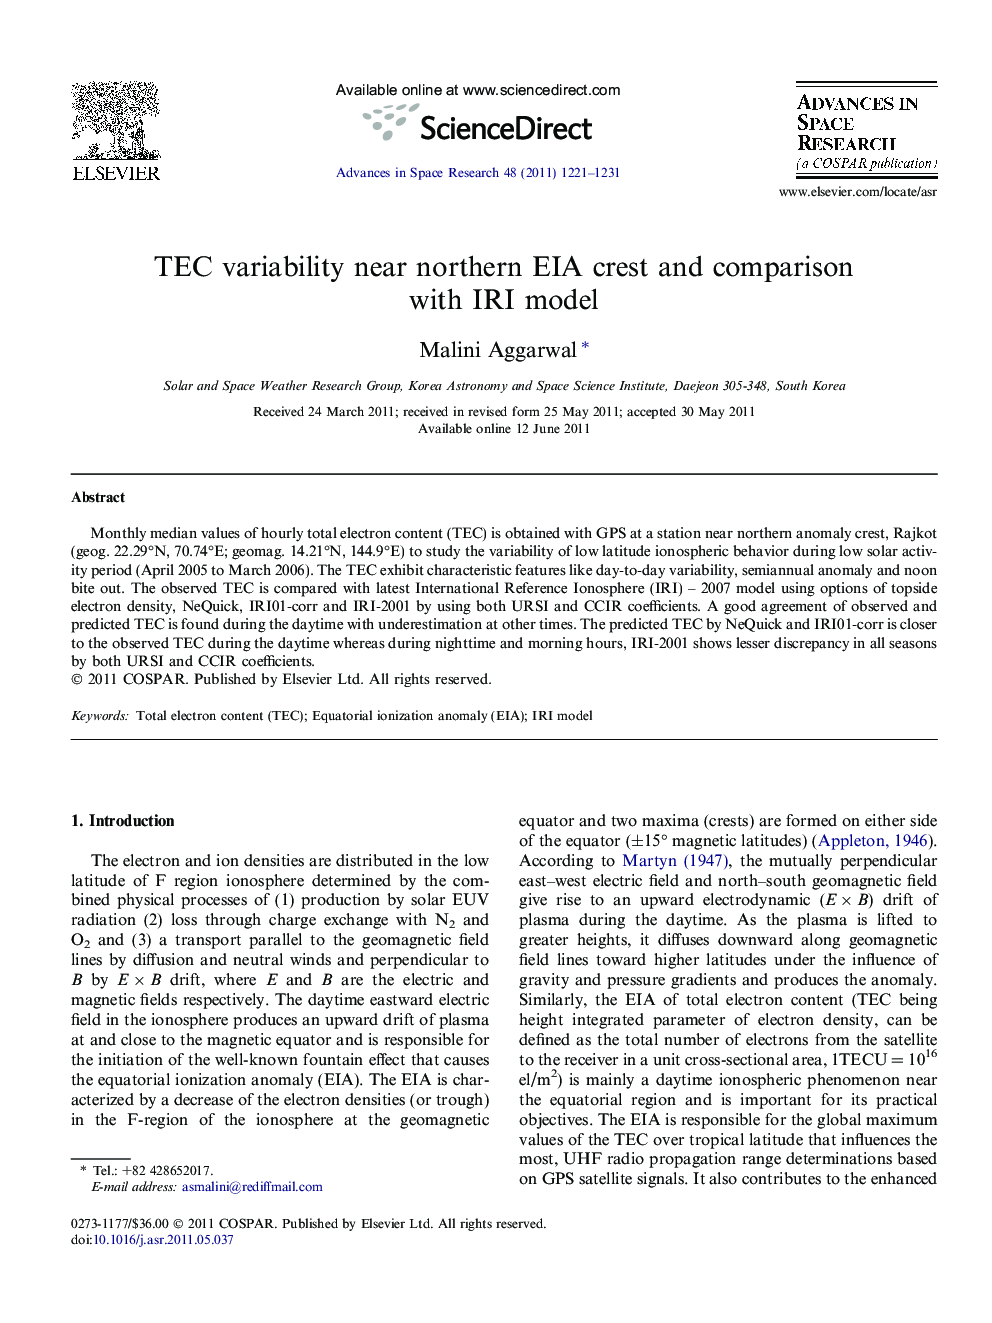 TEC variability near northern EIA crest and comparison with IRI model